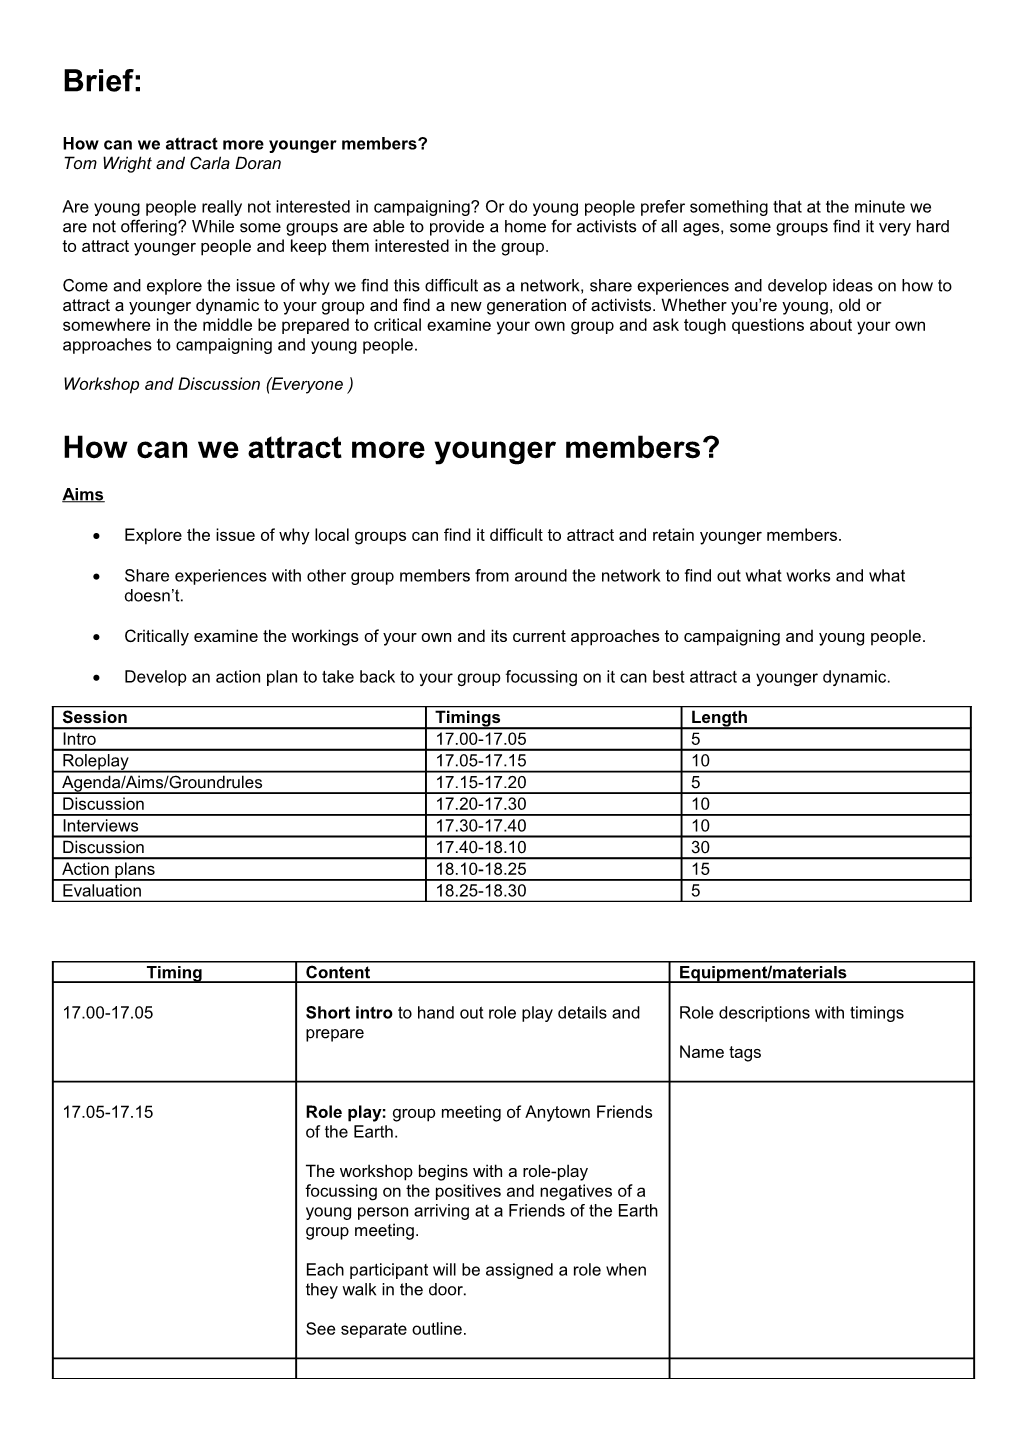 How Can We Attract More Younger Members - Outline